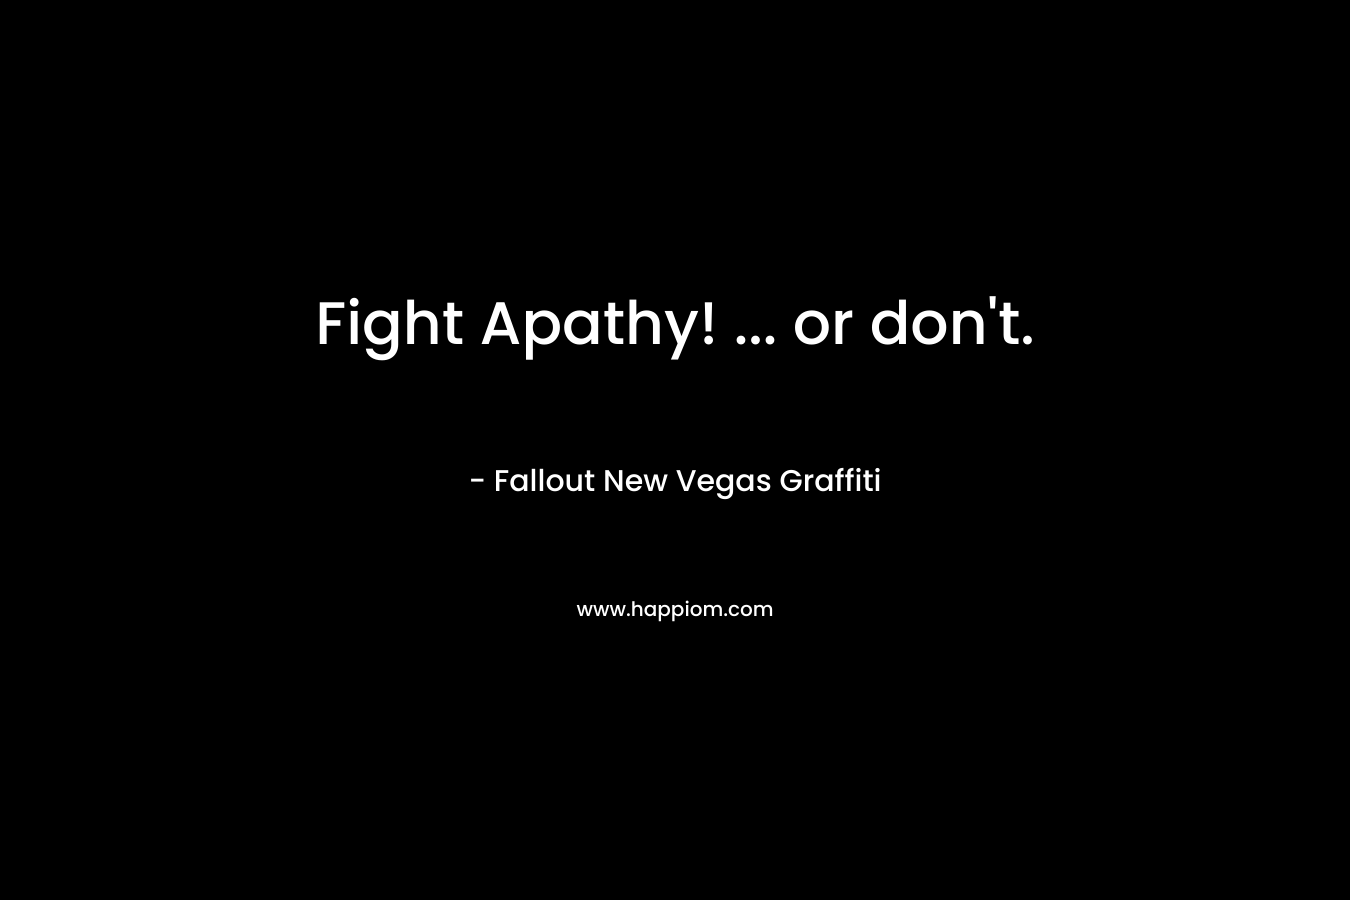 Fight Apathy! ... or don't.